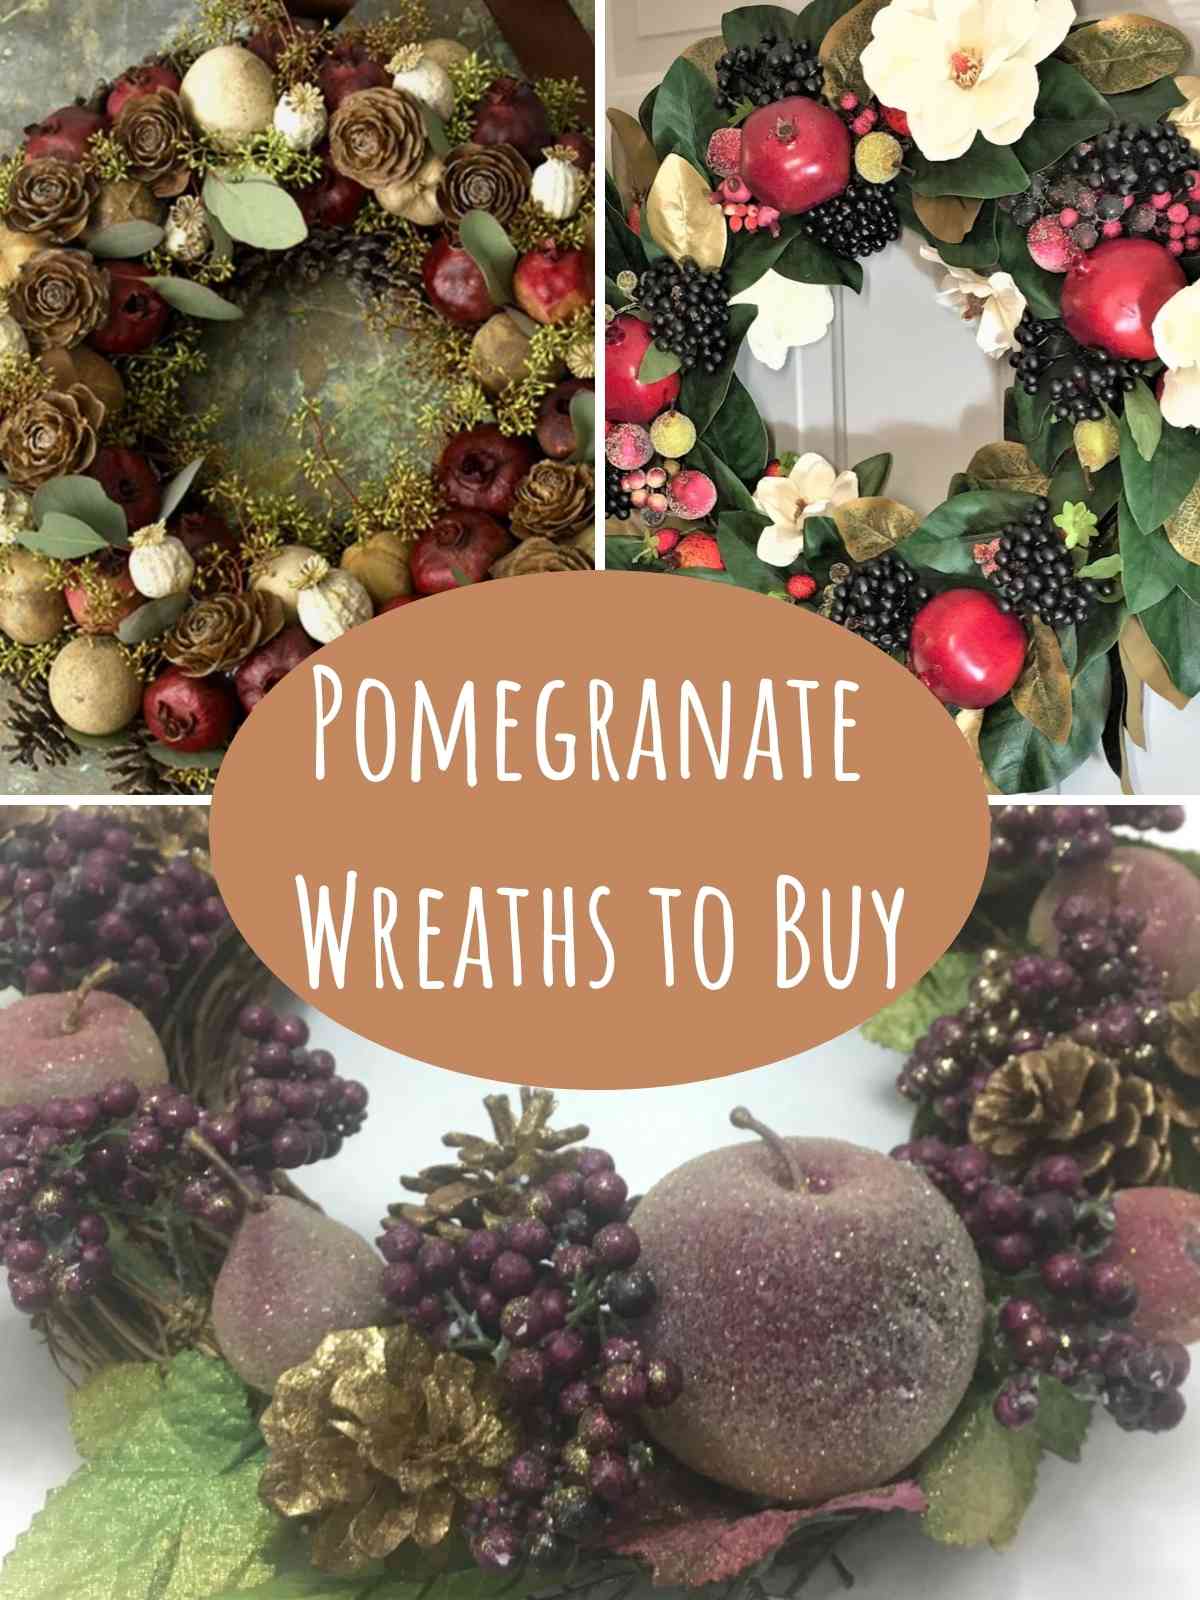 Pomegranate Wreaths to Buy